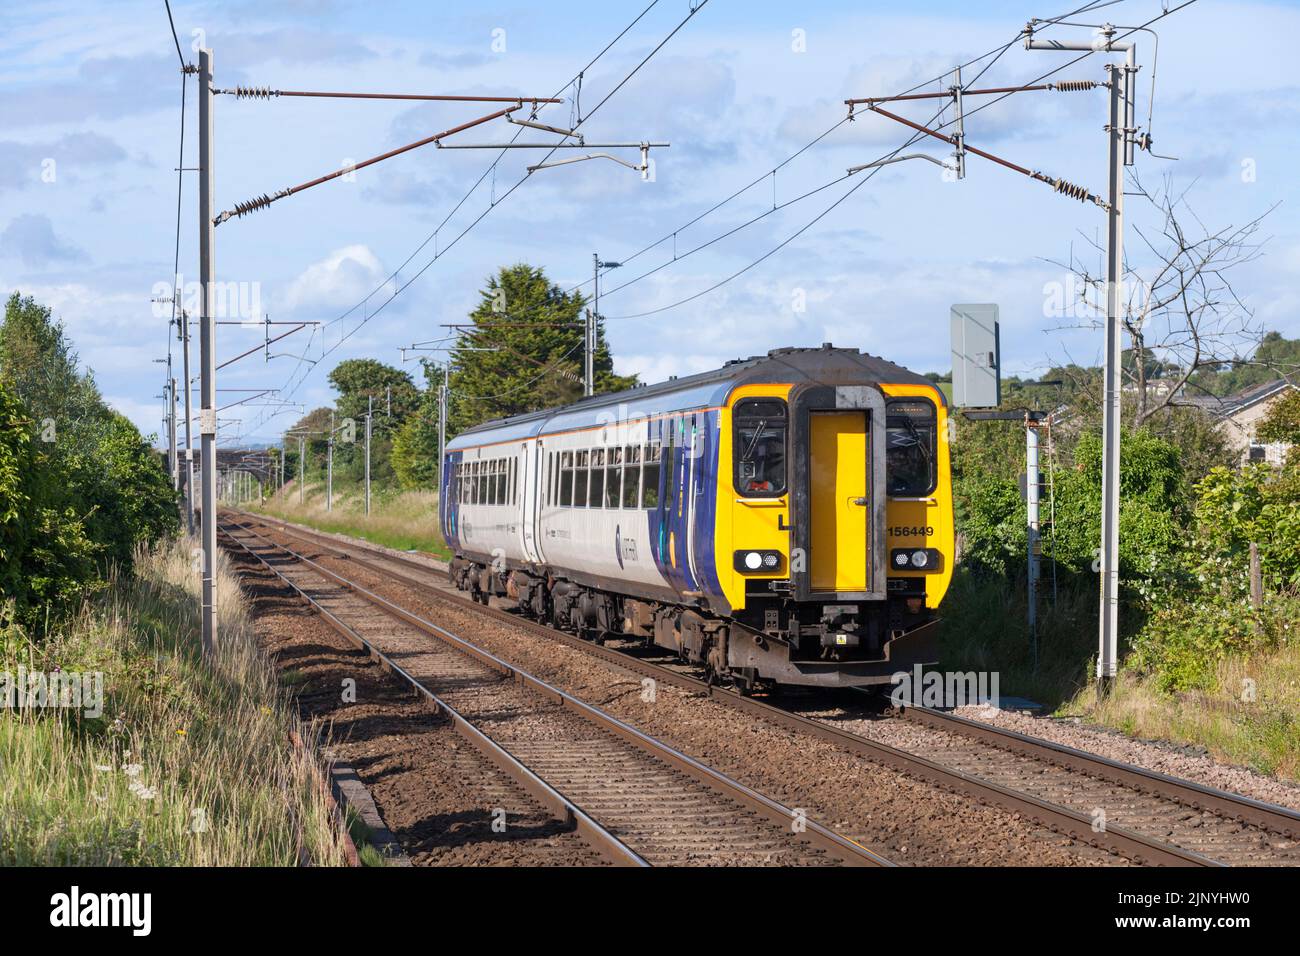 13/07/2022 Bolton Le Sands (south of Carnforth) 156449 2C56 1408 Carlisle to Lancaster Stock Photo